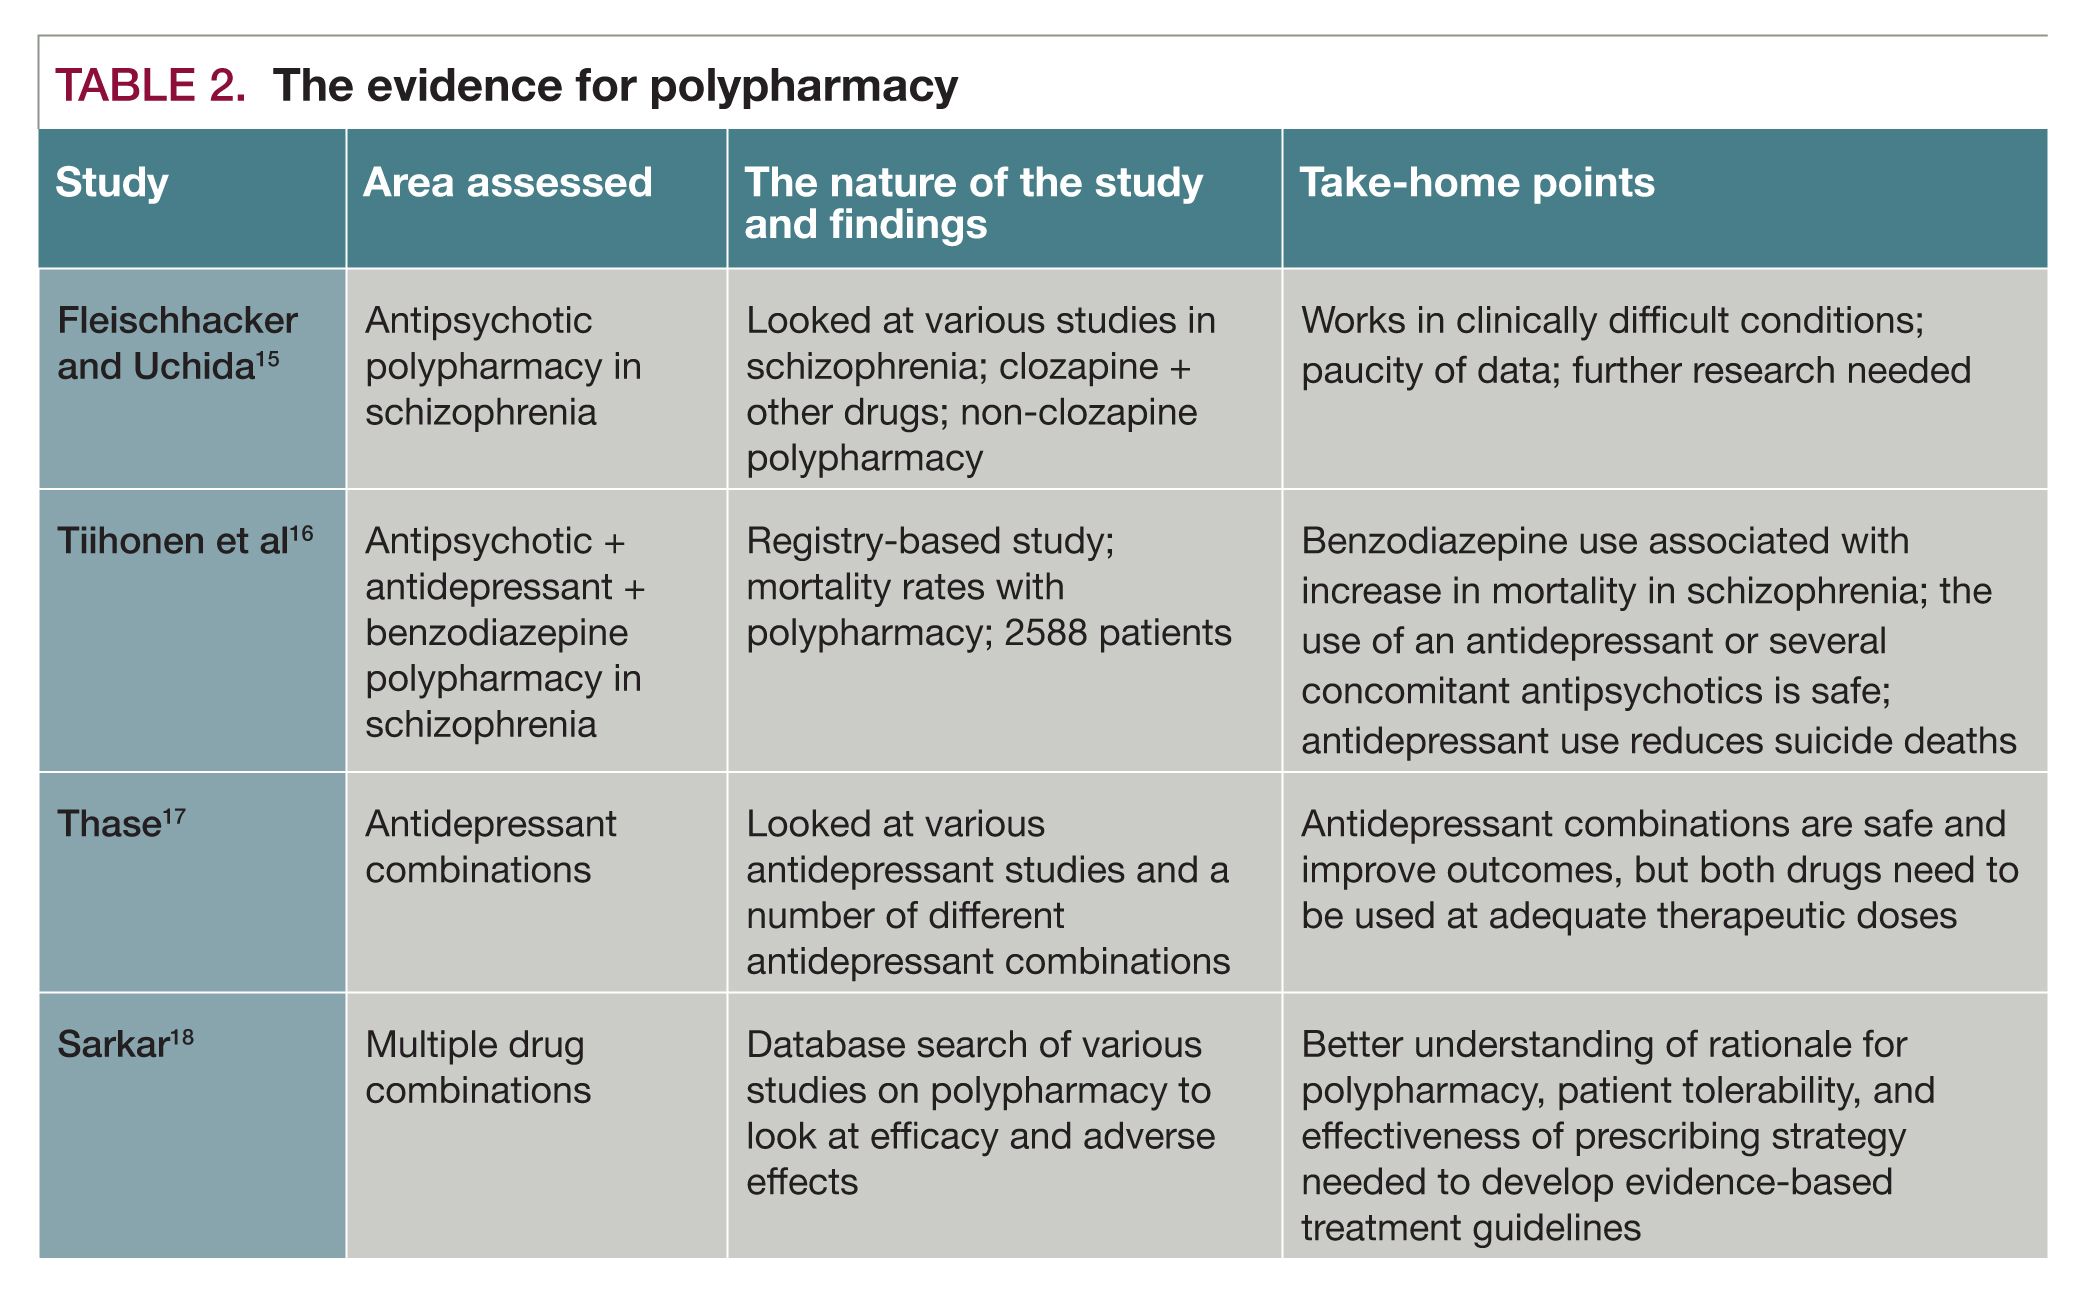 The evidence for polypharmacy